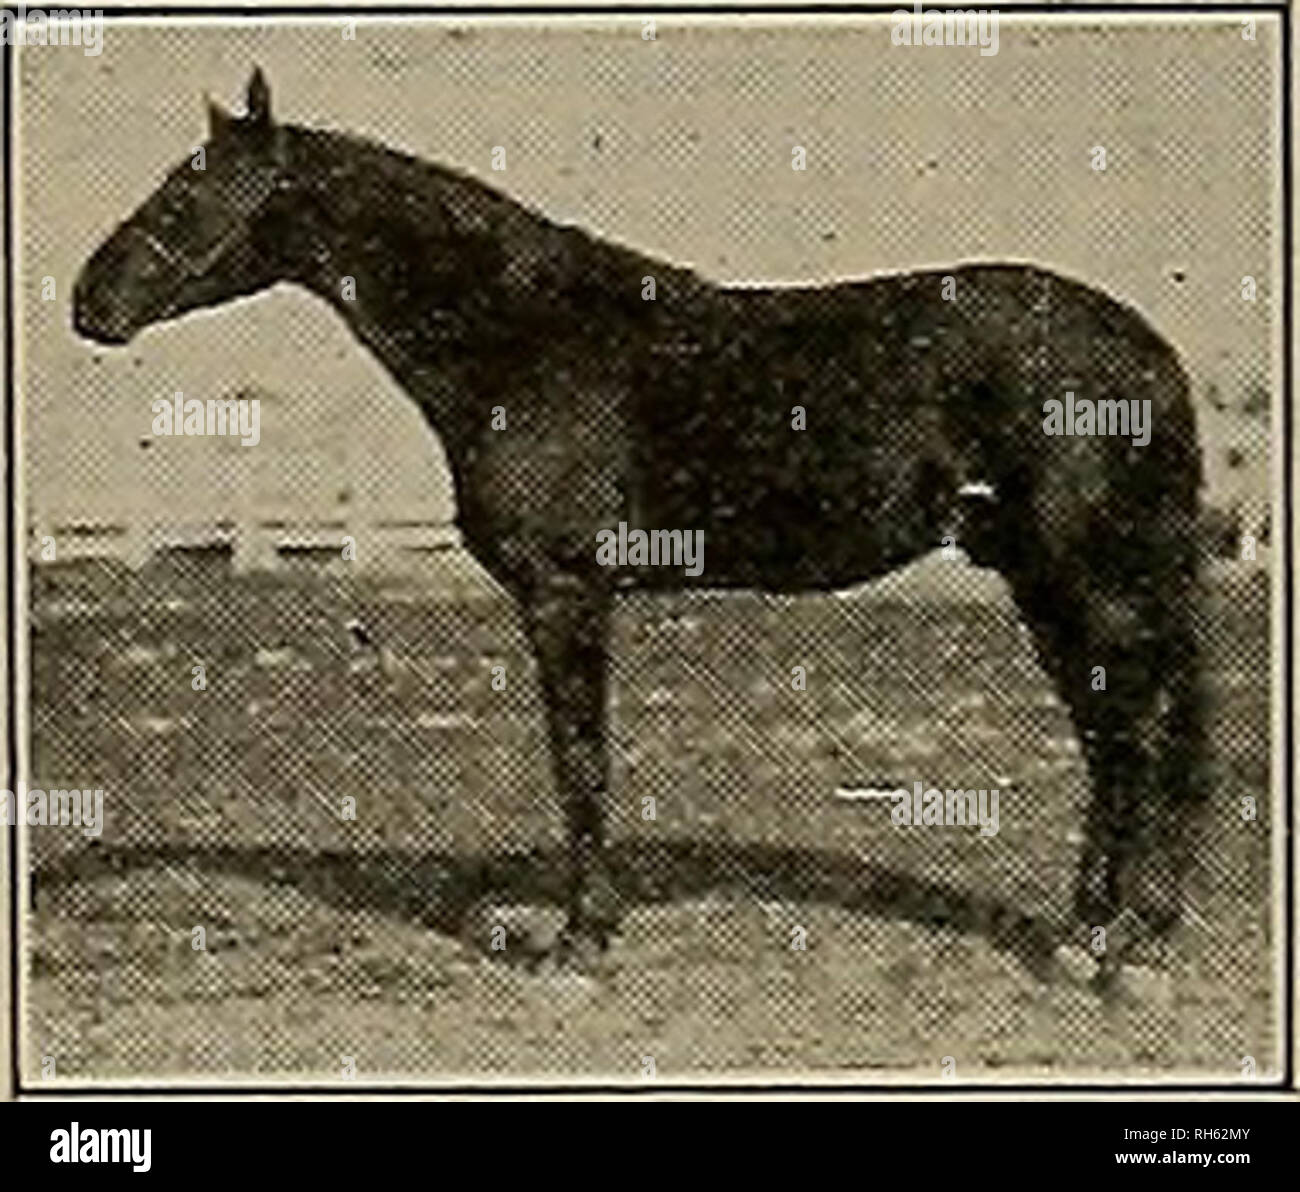 . Breeder and sportsman. Horses. Dam LOUISE CARTER 3, 2:24 Dam of Wilbur Lou (3) 2:1 OK Mamie Alwln 2:12 Martin Carter (3) 2:29M Daughter of Chestnut Tom 2:15 by Nutwood Wilkes 2:16% WORLD'S CHAMPION YEARLING TROTTING STALLION 1910 Unbeaten Two-Year-Old in 1911 Winner of California State Fair and Pacific Coast Breeders' Association Futurities in 1912. Record in Third Heat of a Winning Race. Also holder of the World's Record of a Five-Heat Race by a 3-yr.-old Stallion Limited number of approved mares at $100 the season. WILBUR LOU was bred to seven (7) mares in 1912 and got seven (7) foals; six Stock Photo